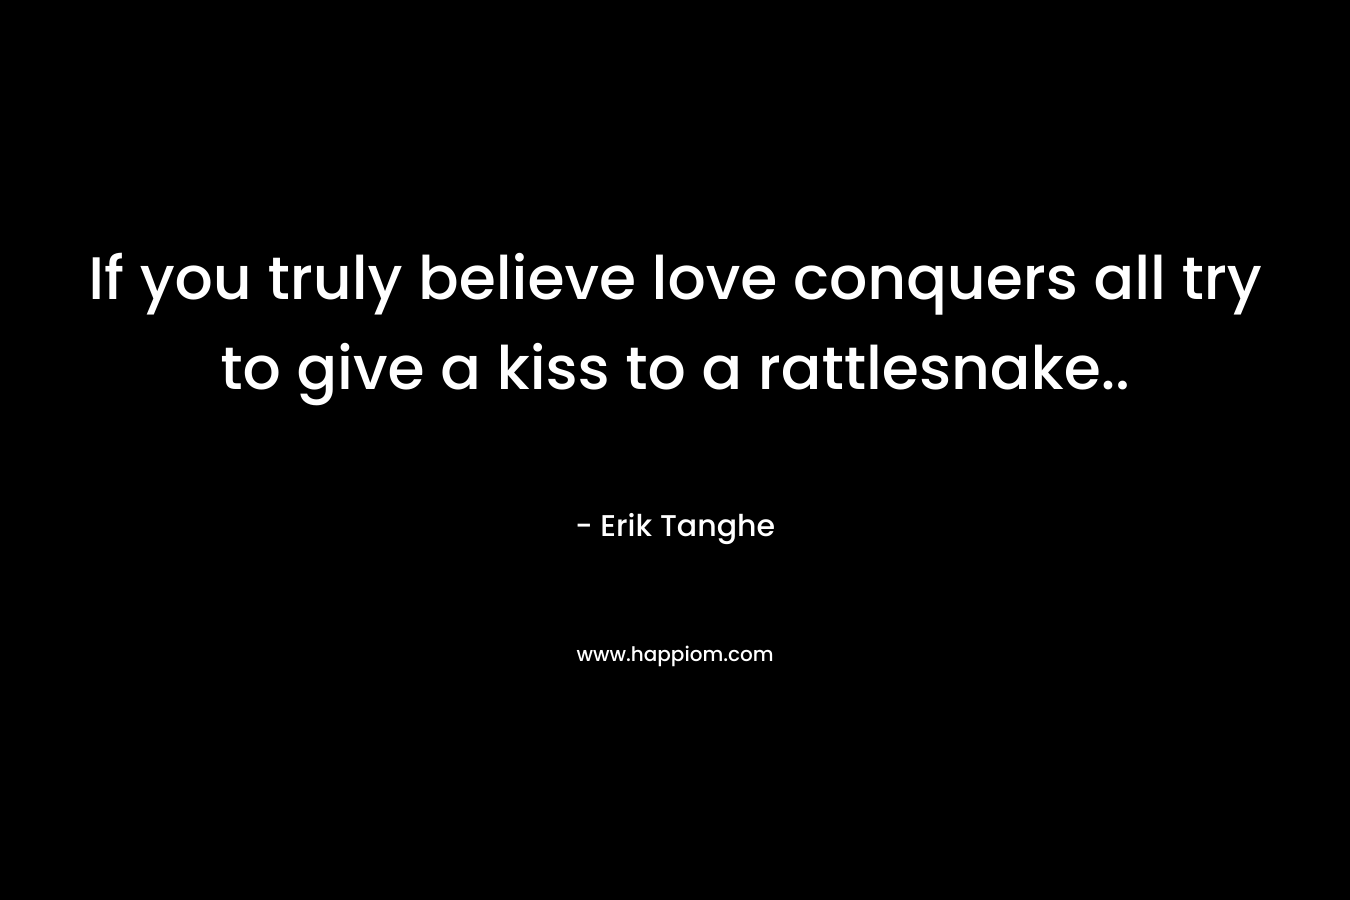 If you truly believe love conquers all try to give a kiss to a rattlesnake..